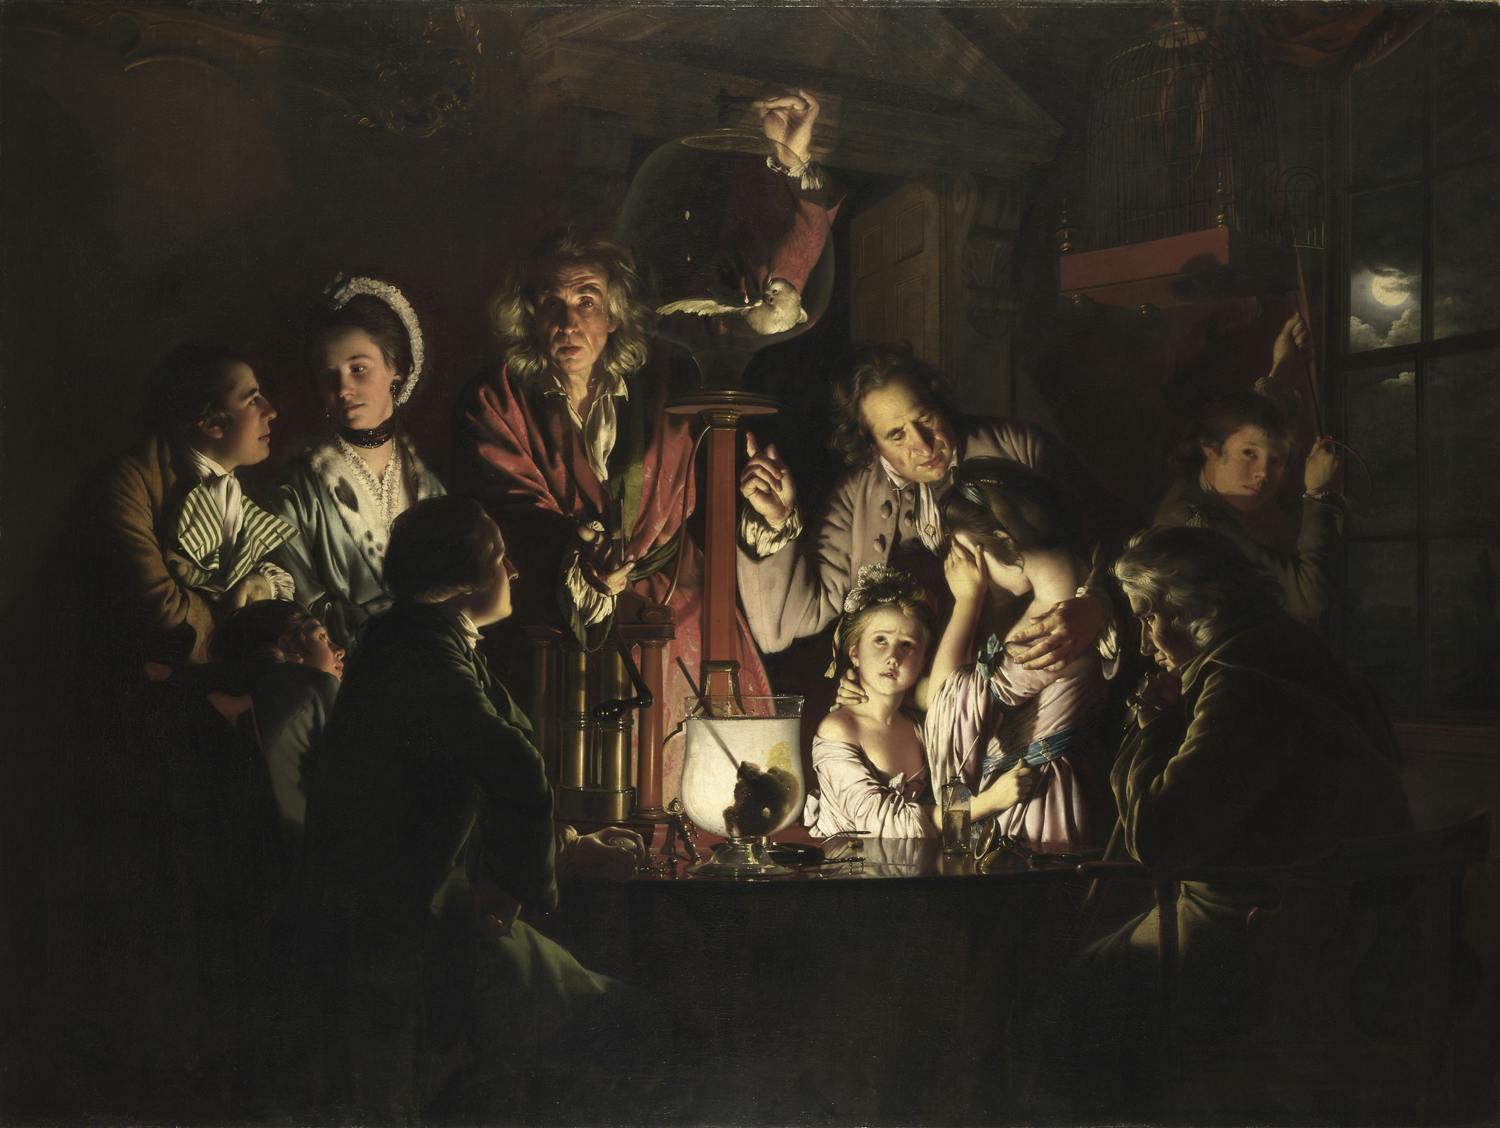 The renowned "Experiment" by Joseph Wright of Derby in Italy for the first time